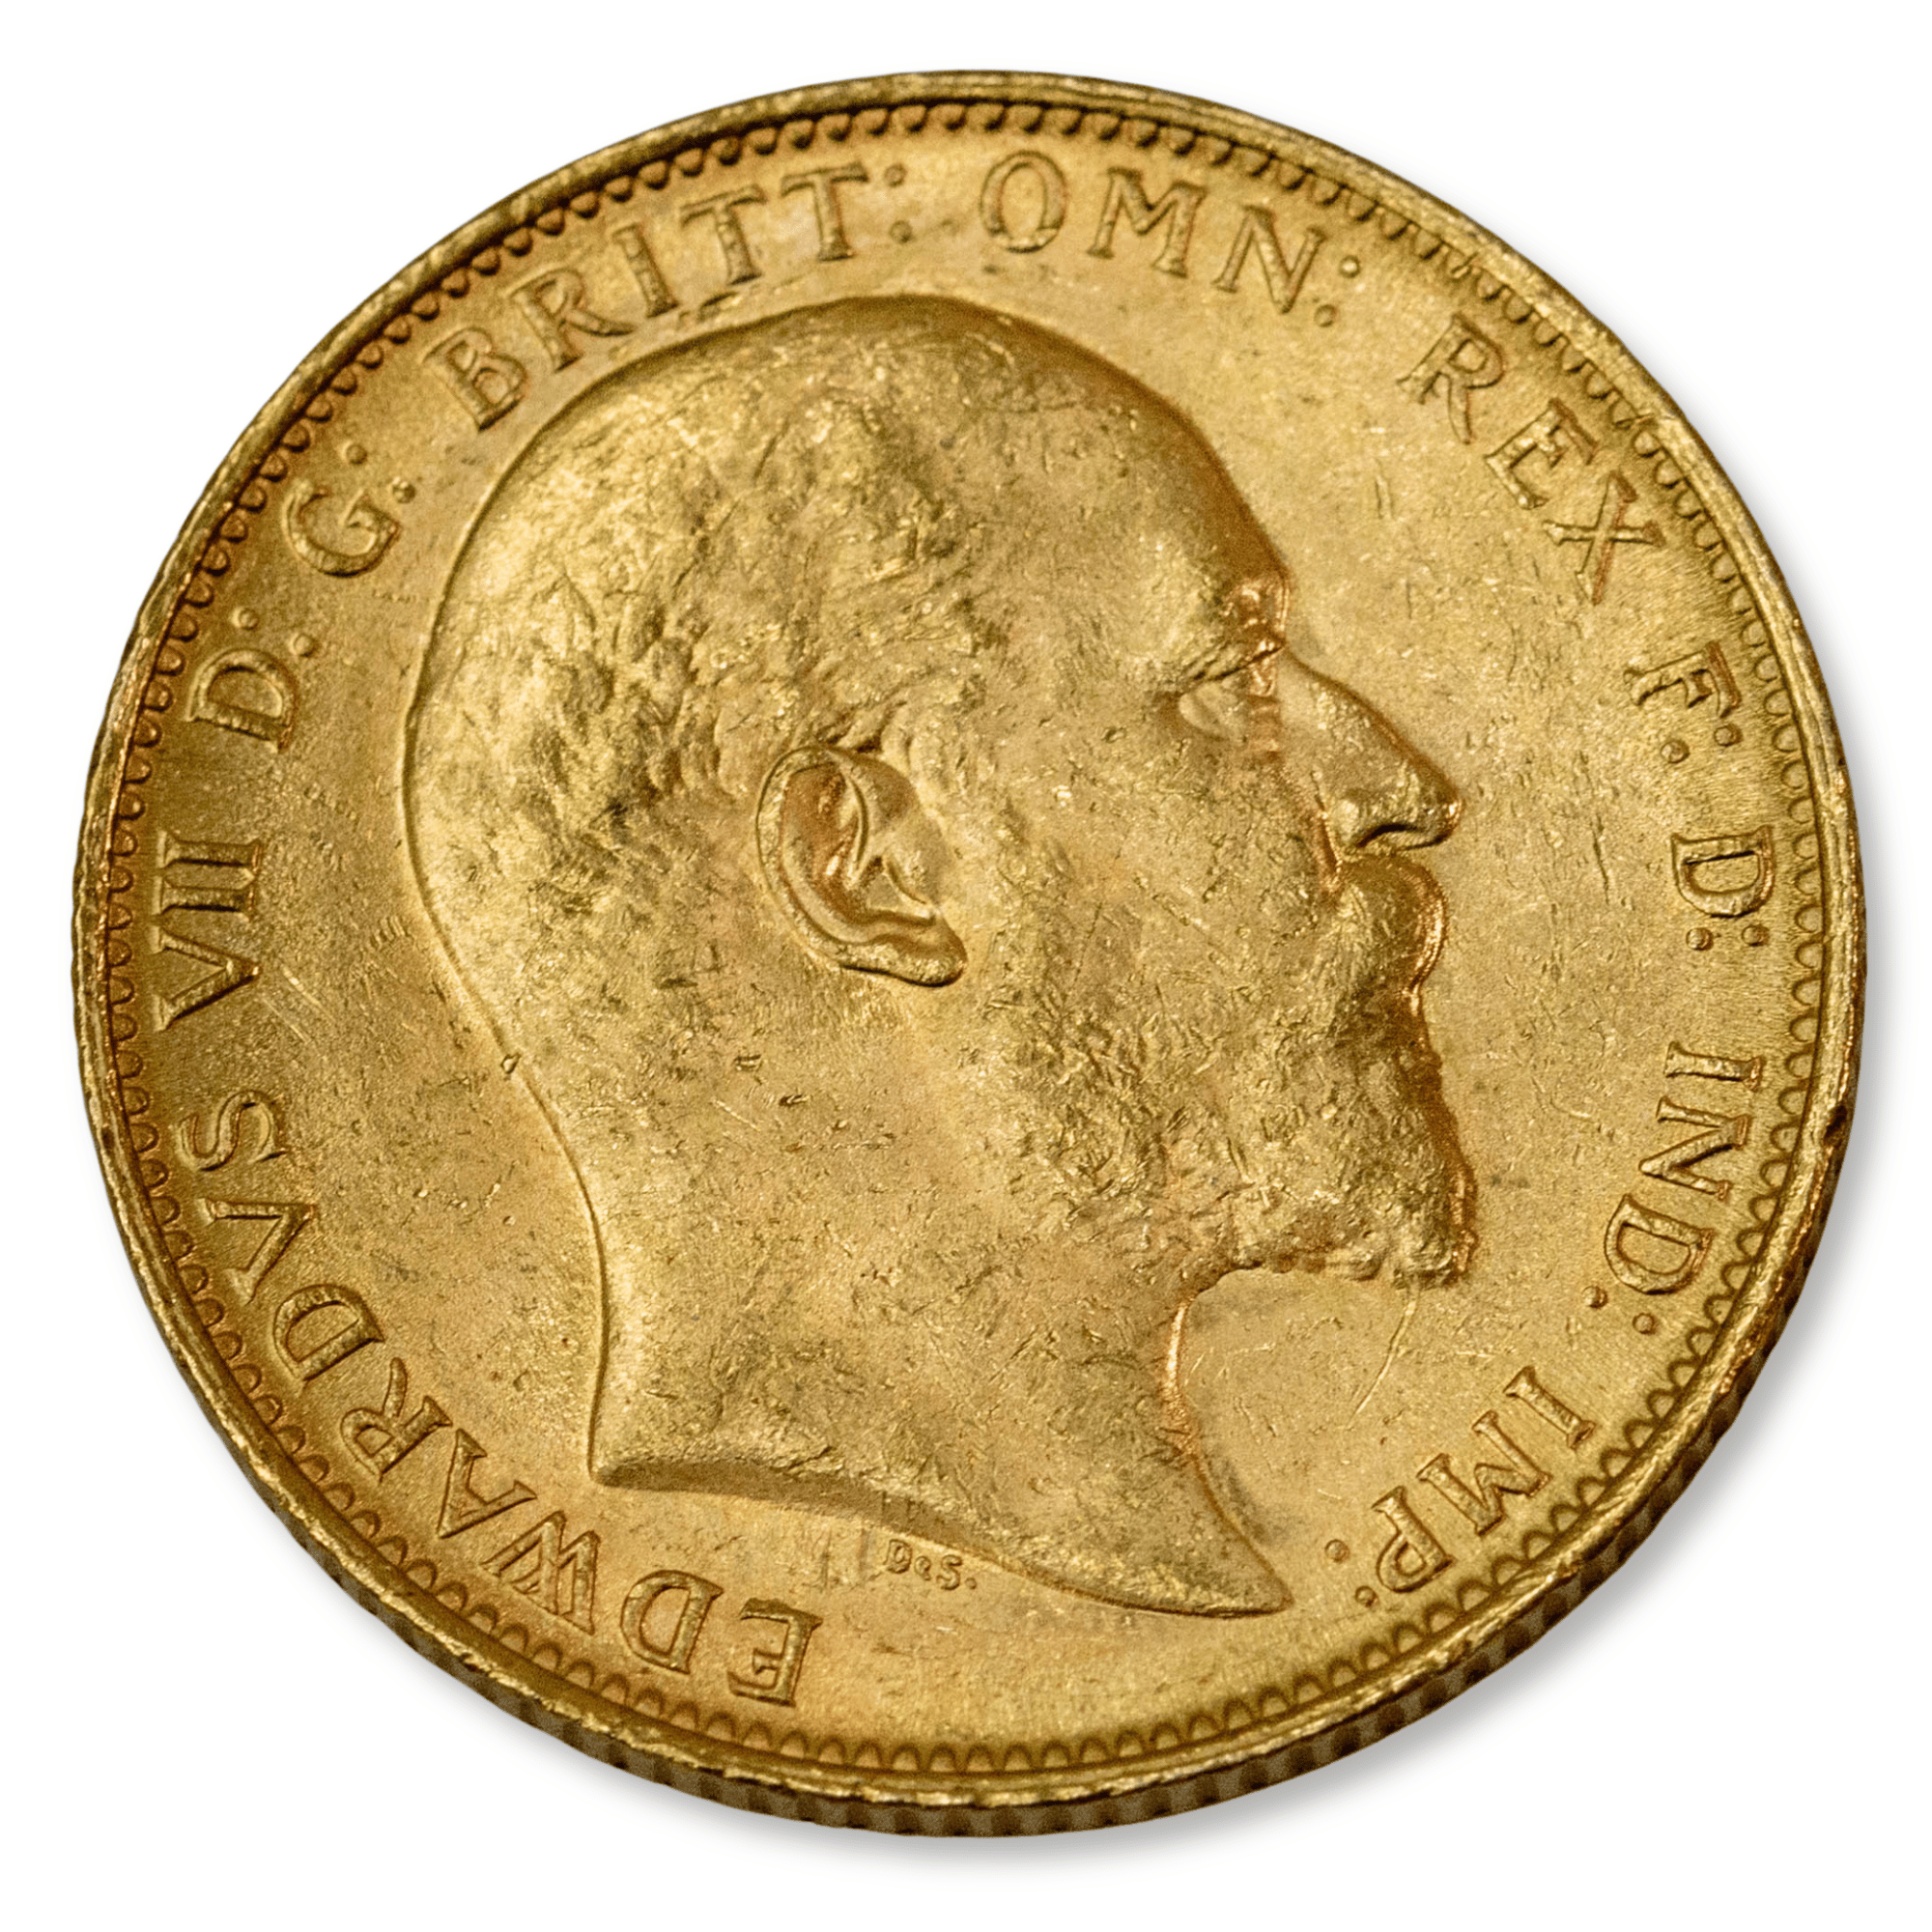 1917S George V Sovereign Uncirculated